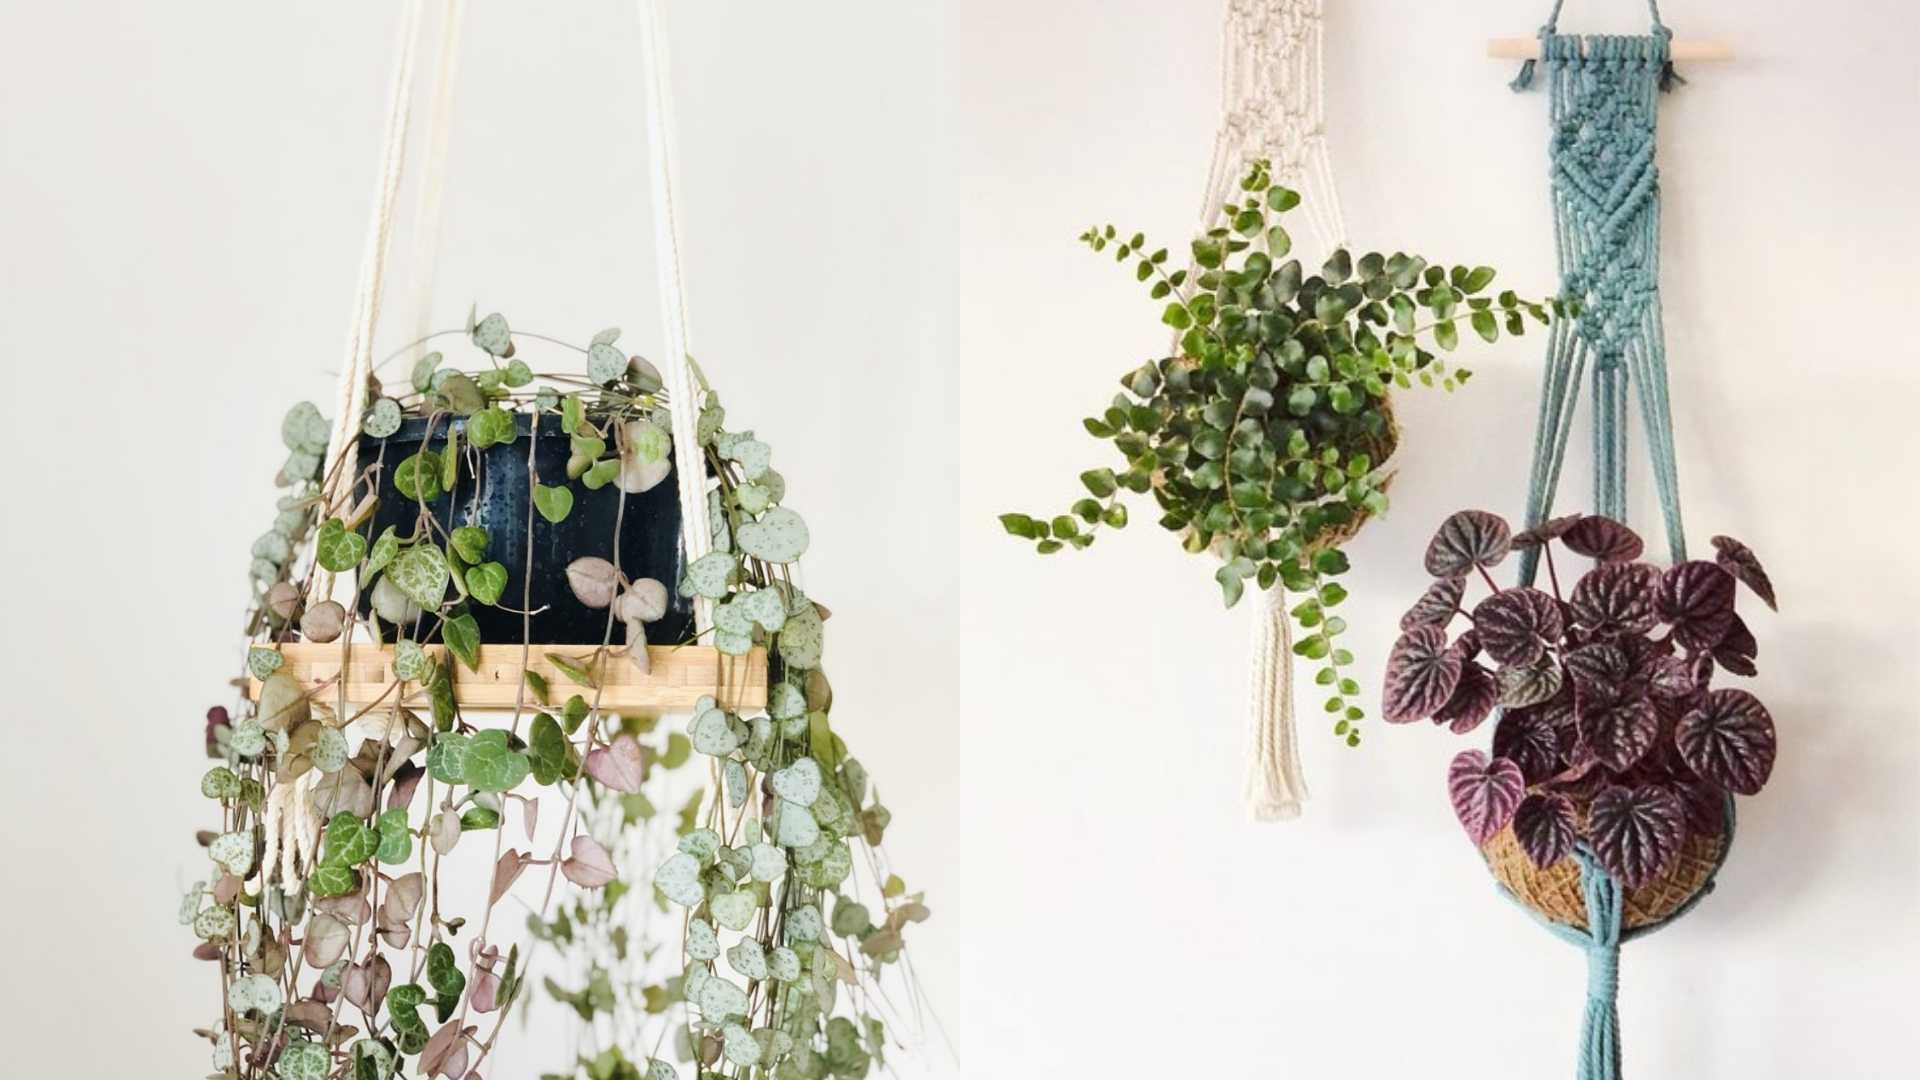 Different styles of plant hangers containing different species of plants.